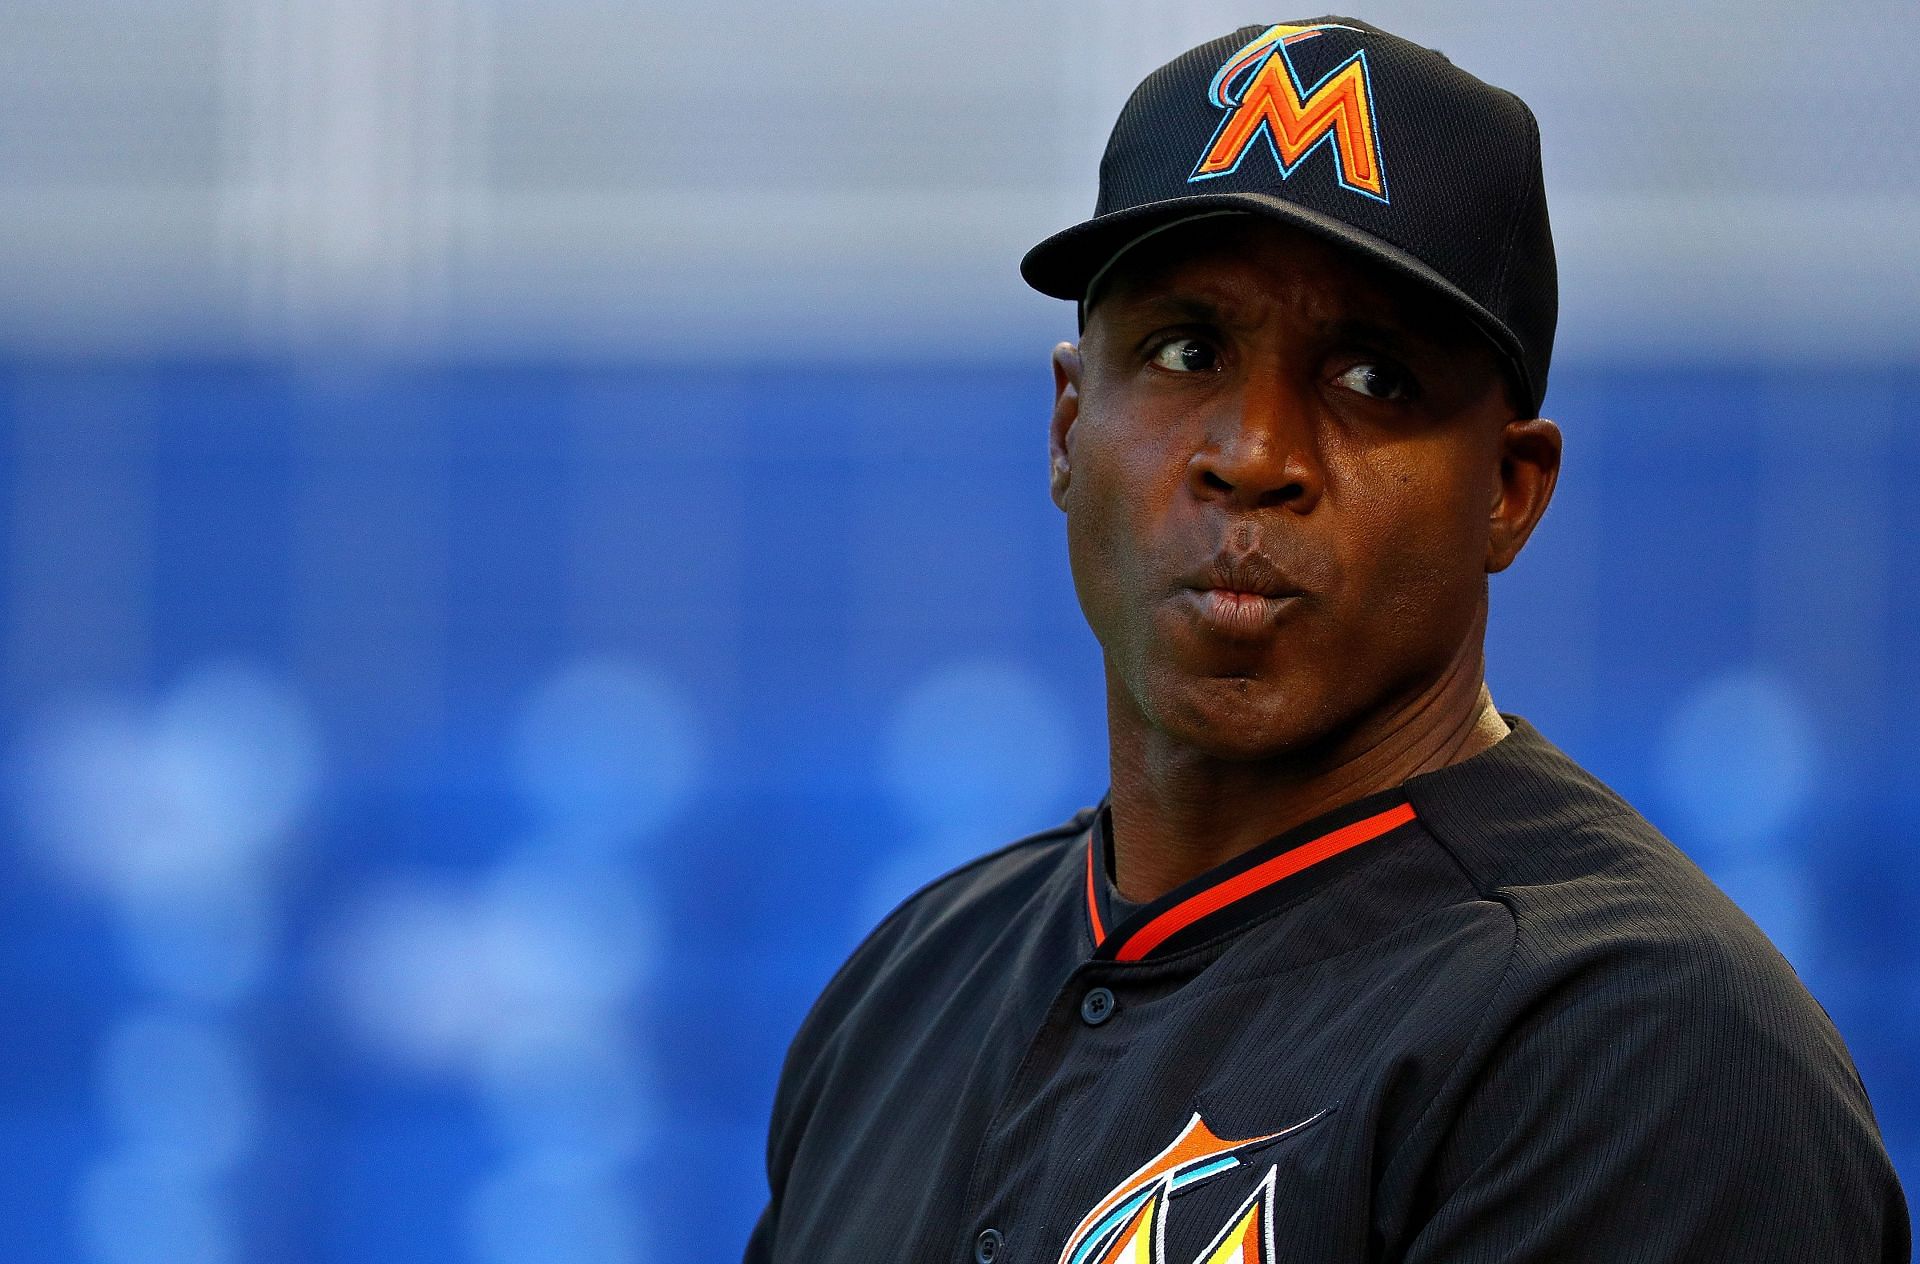 Hitting coach Barry Bonds of the Miami Marlins looks on during 2016 Opening Day against the Detroit Tigers at Marlins Park - April 5, 2016 (Photo by Mike Ehrmann/Getty Images)